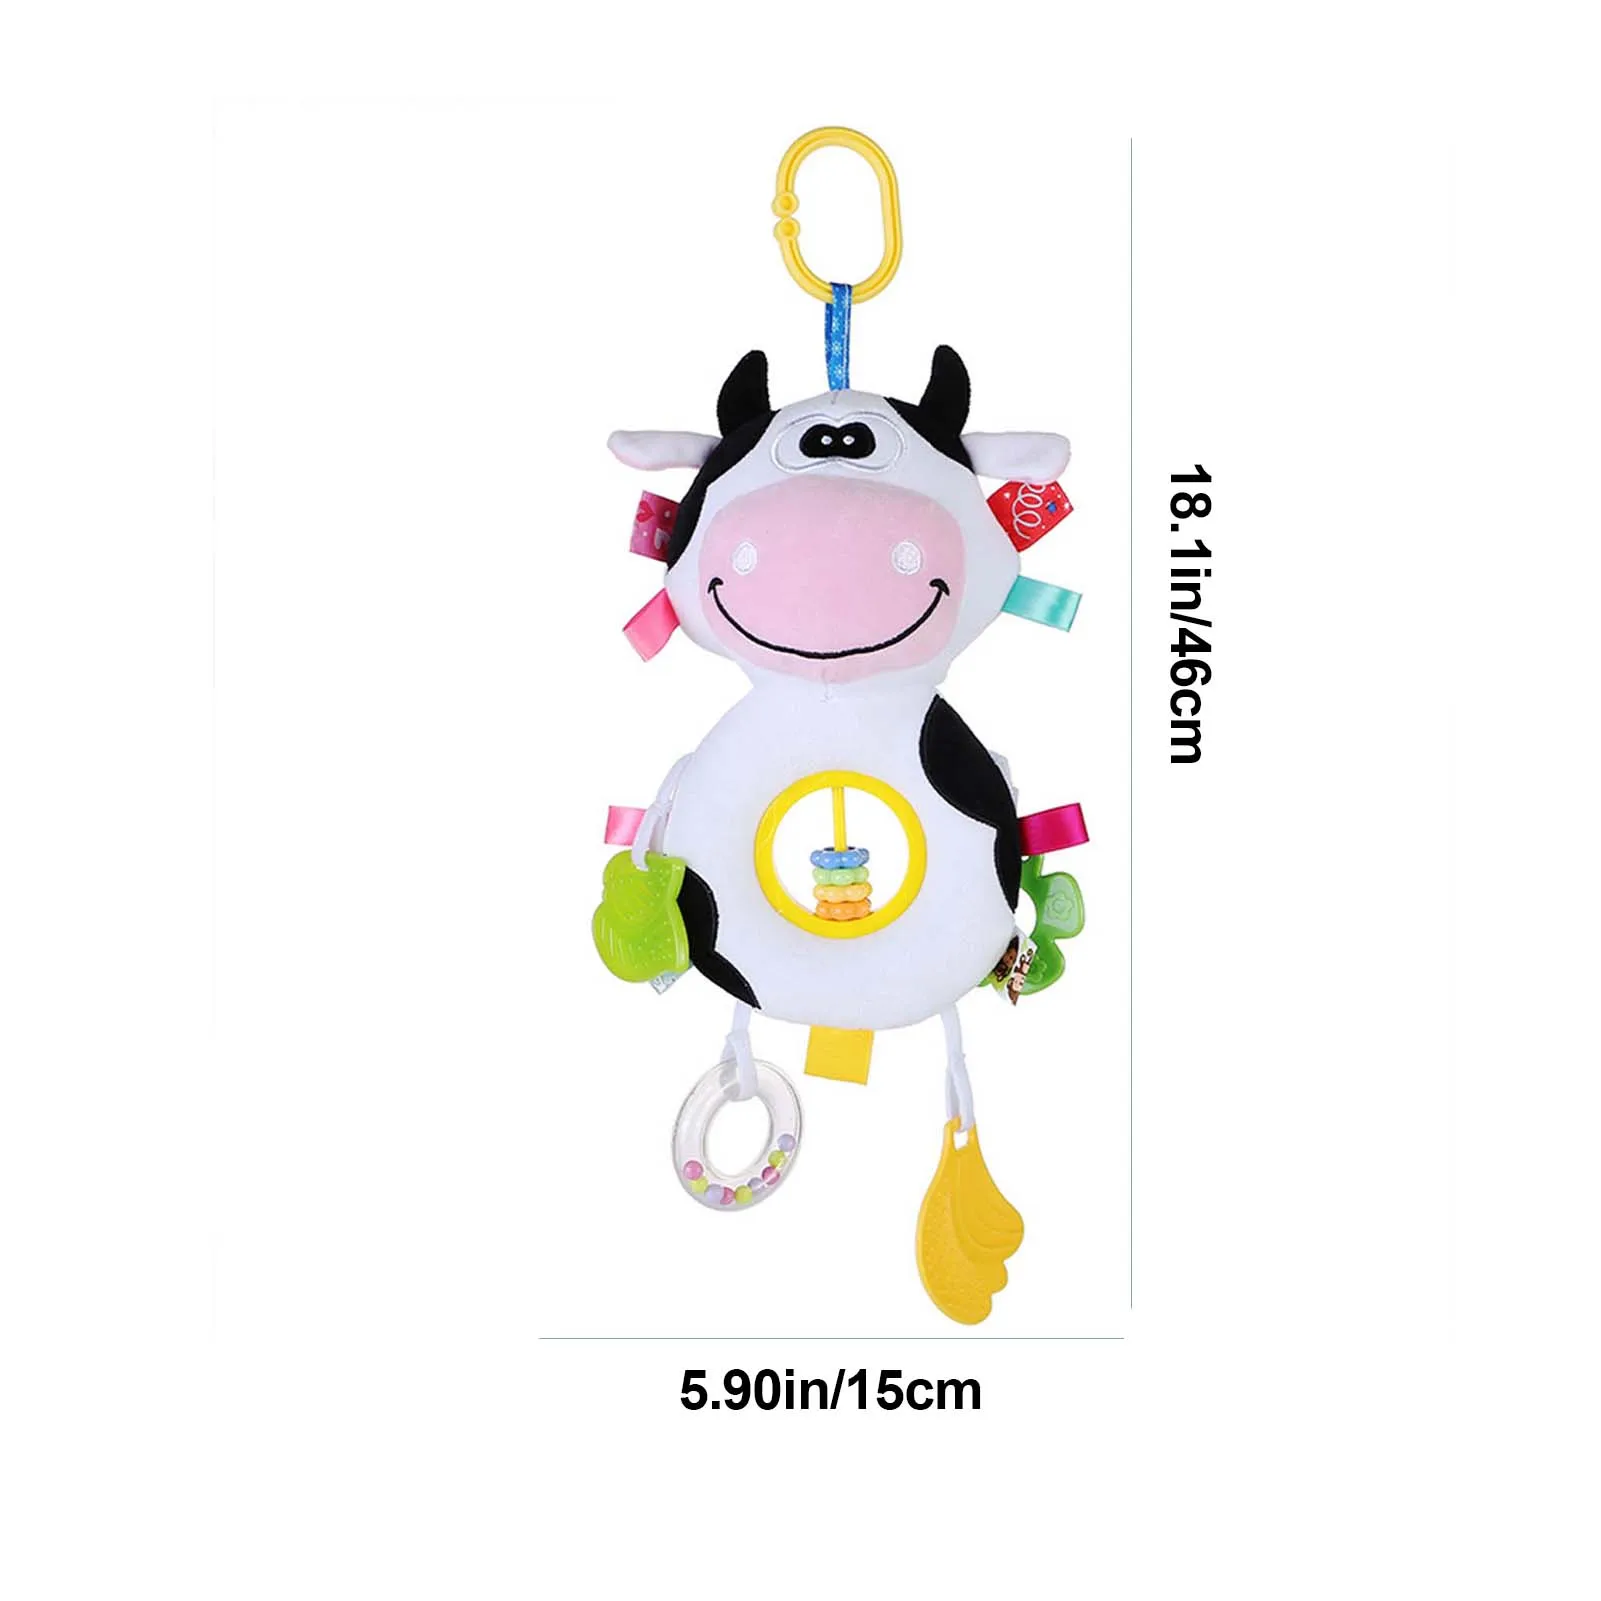 Baby Rattle Stroller Toys Baby Teether Plush Cow Activity Toy Set 3 In 1 Baby Car Seats Activity Toy Hangings Rattle Toys For images - 6